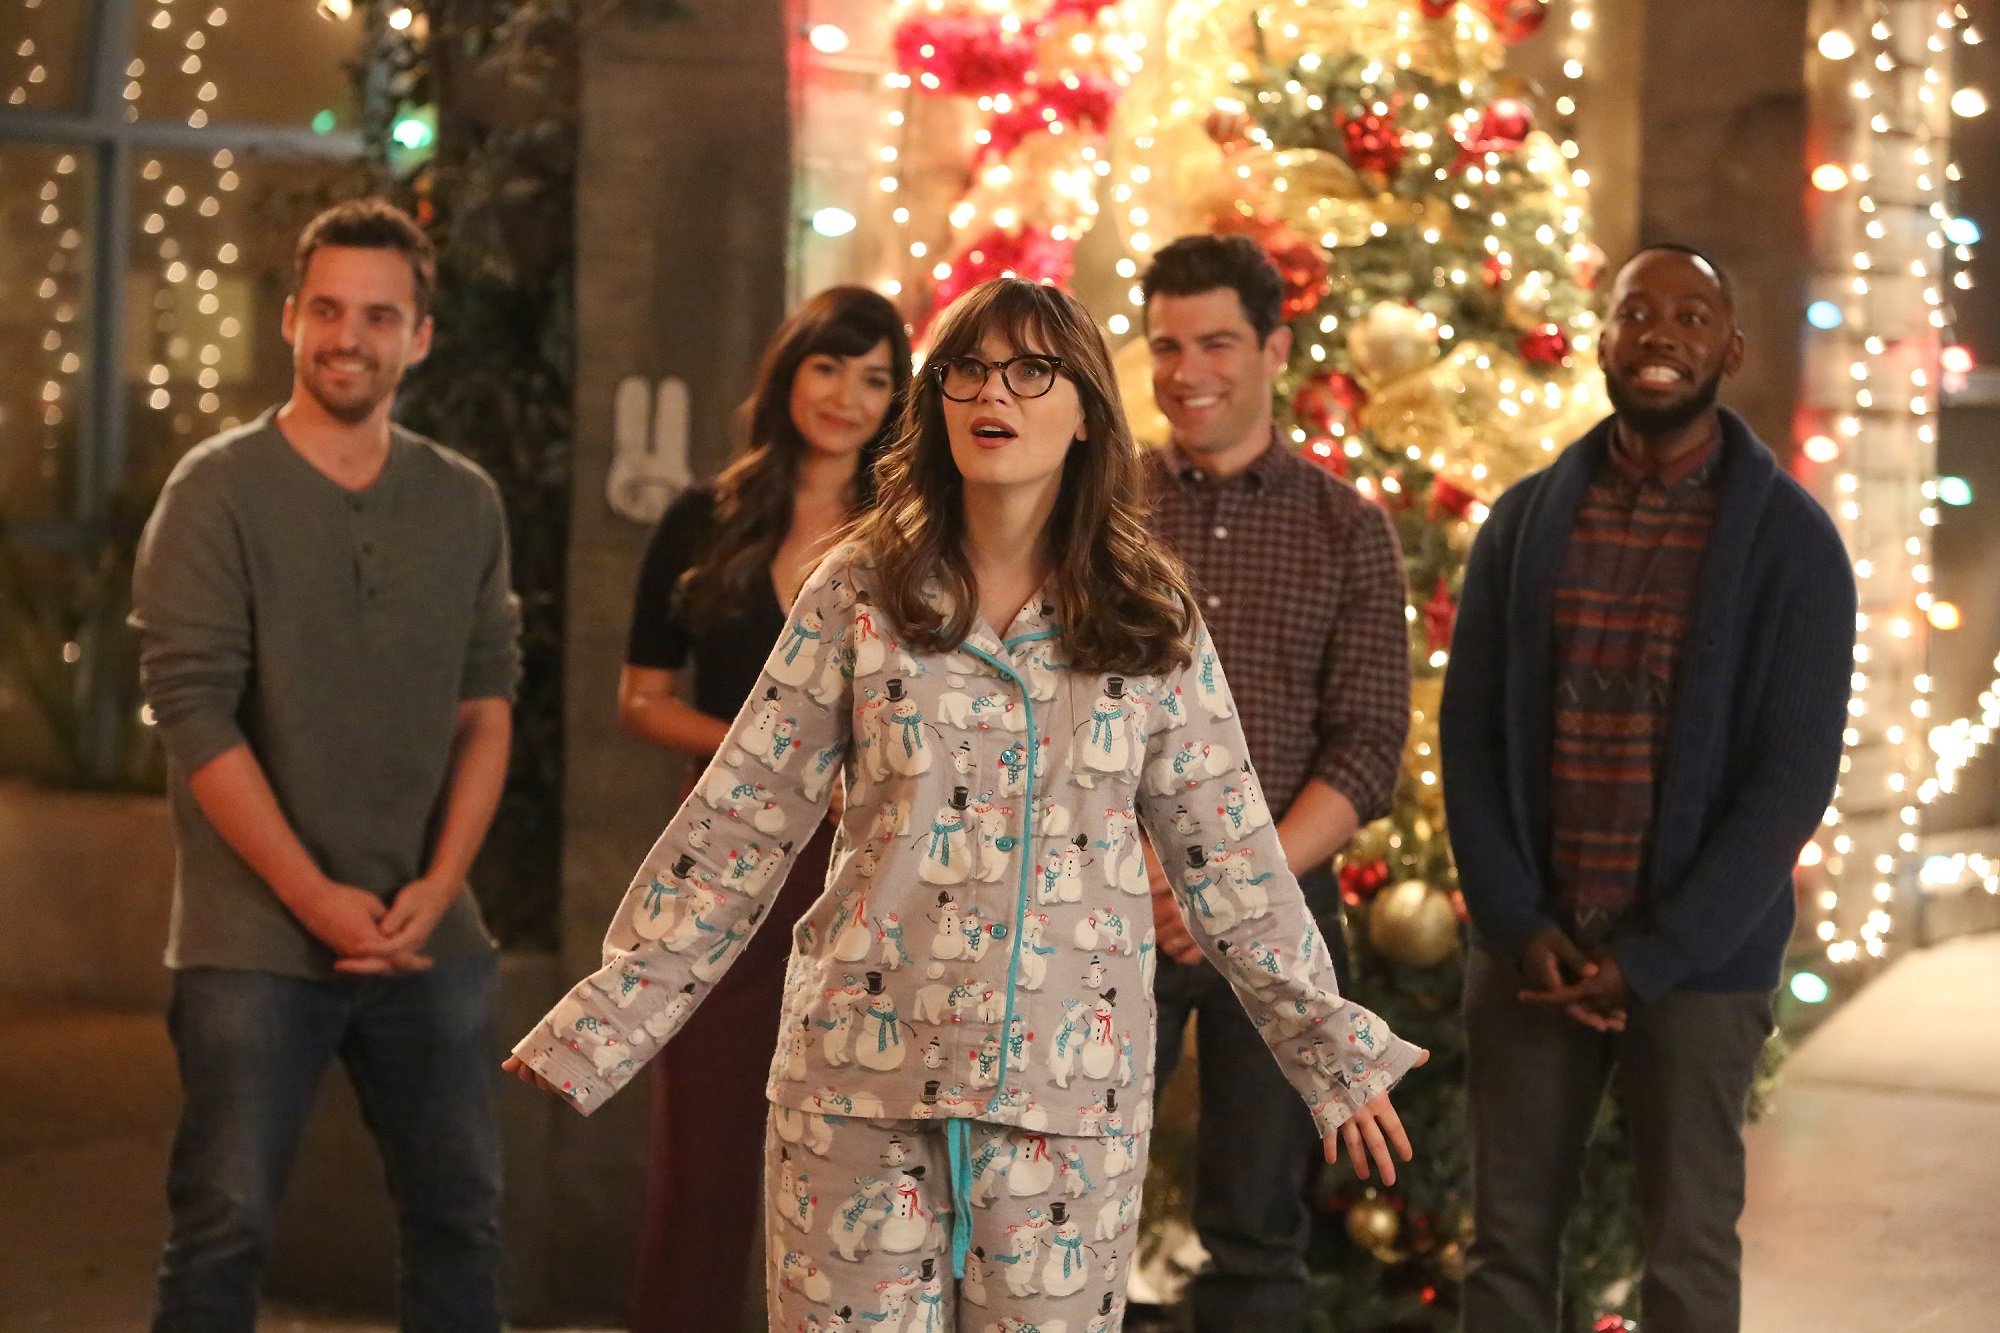 L-R: Jake Johnson, Hannah Simone, Zooey Deschanel, Max Greenfield and Lamorne Morris in one of the 'New Girl' Christmas episodes.